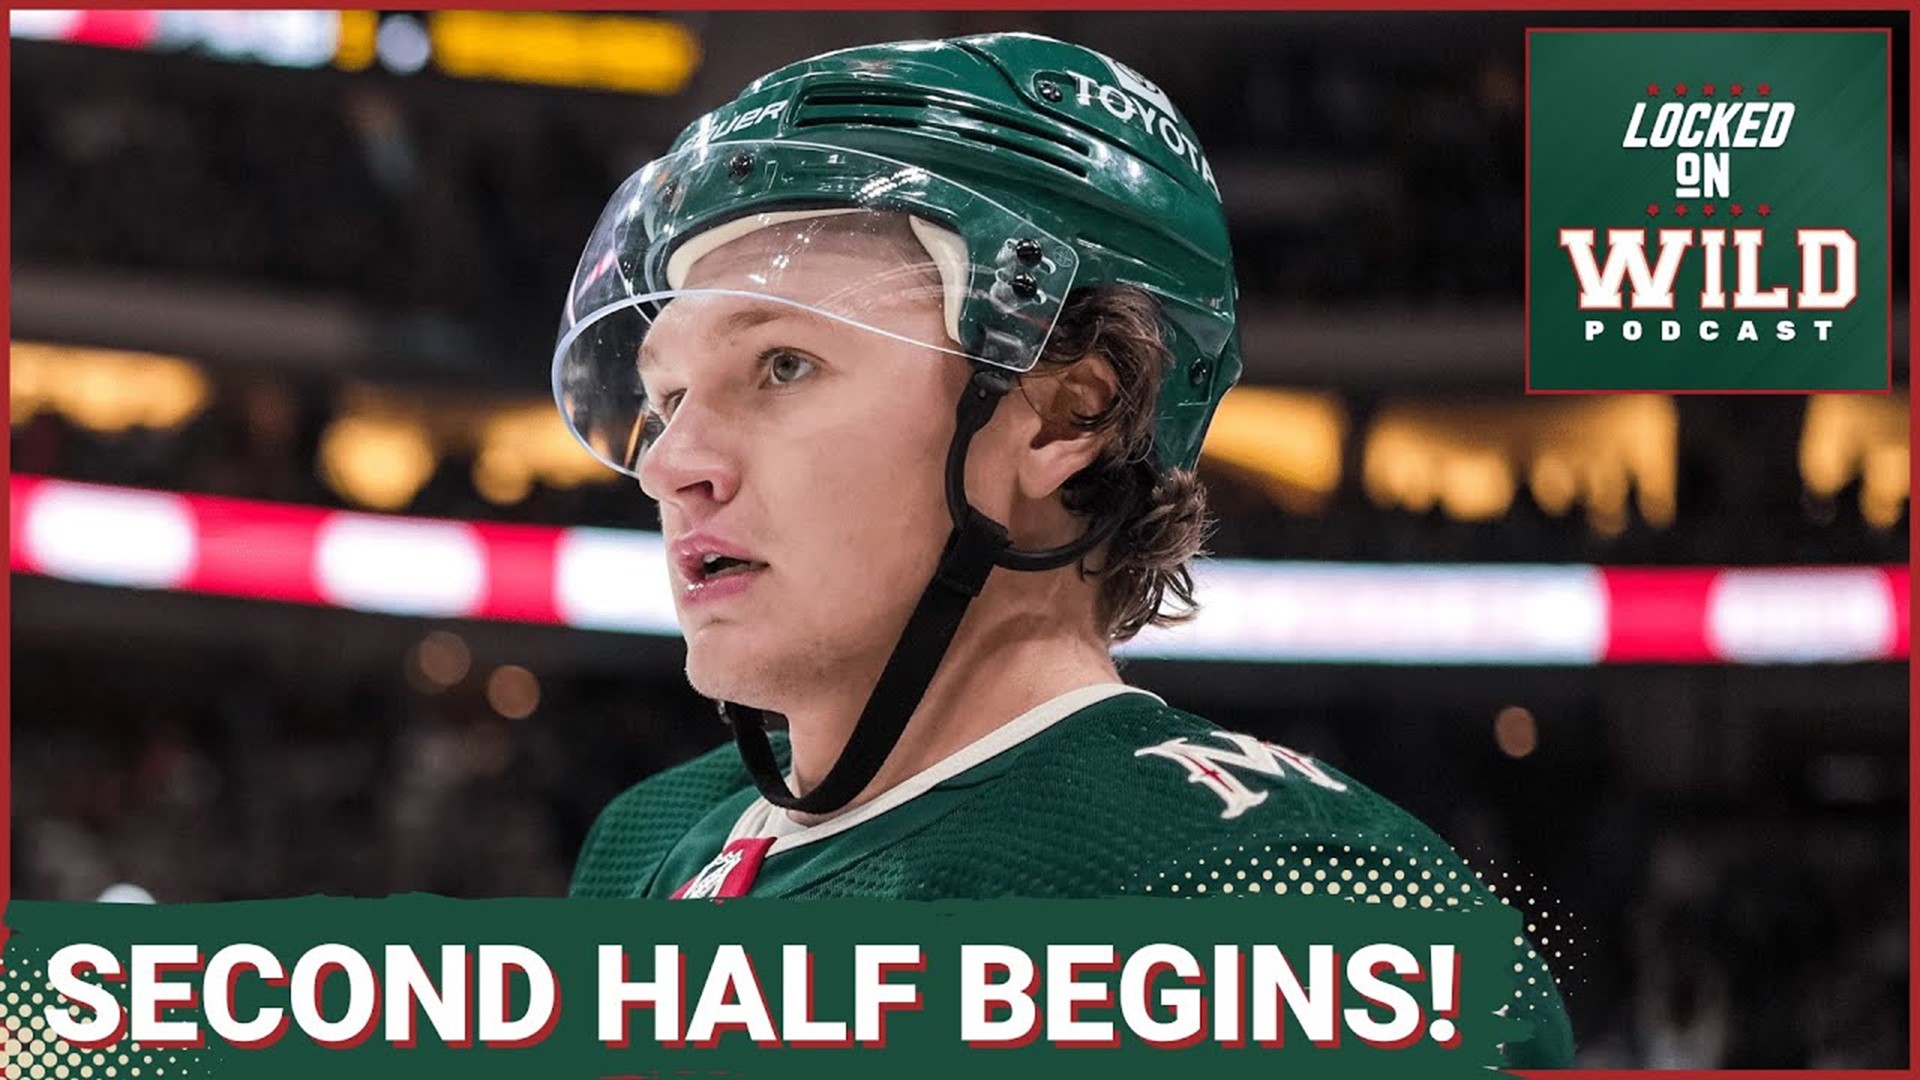 The Minnesota Wild are Rested and Ready for Big Second Half!